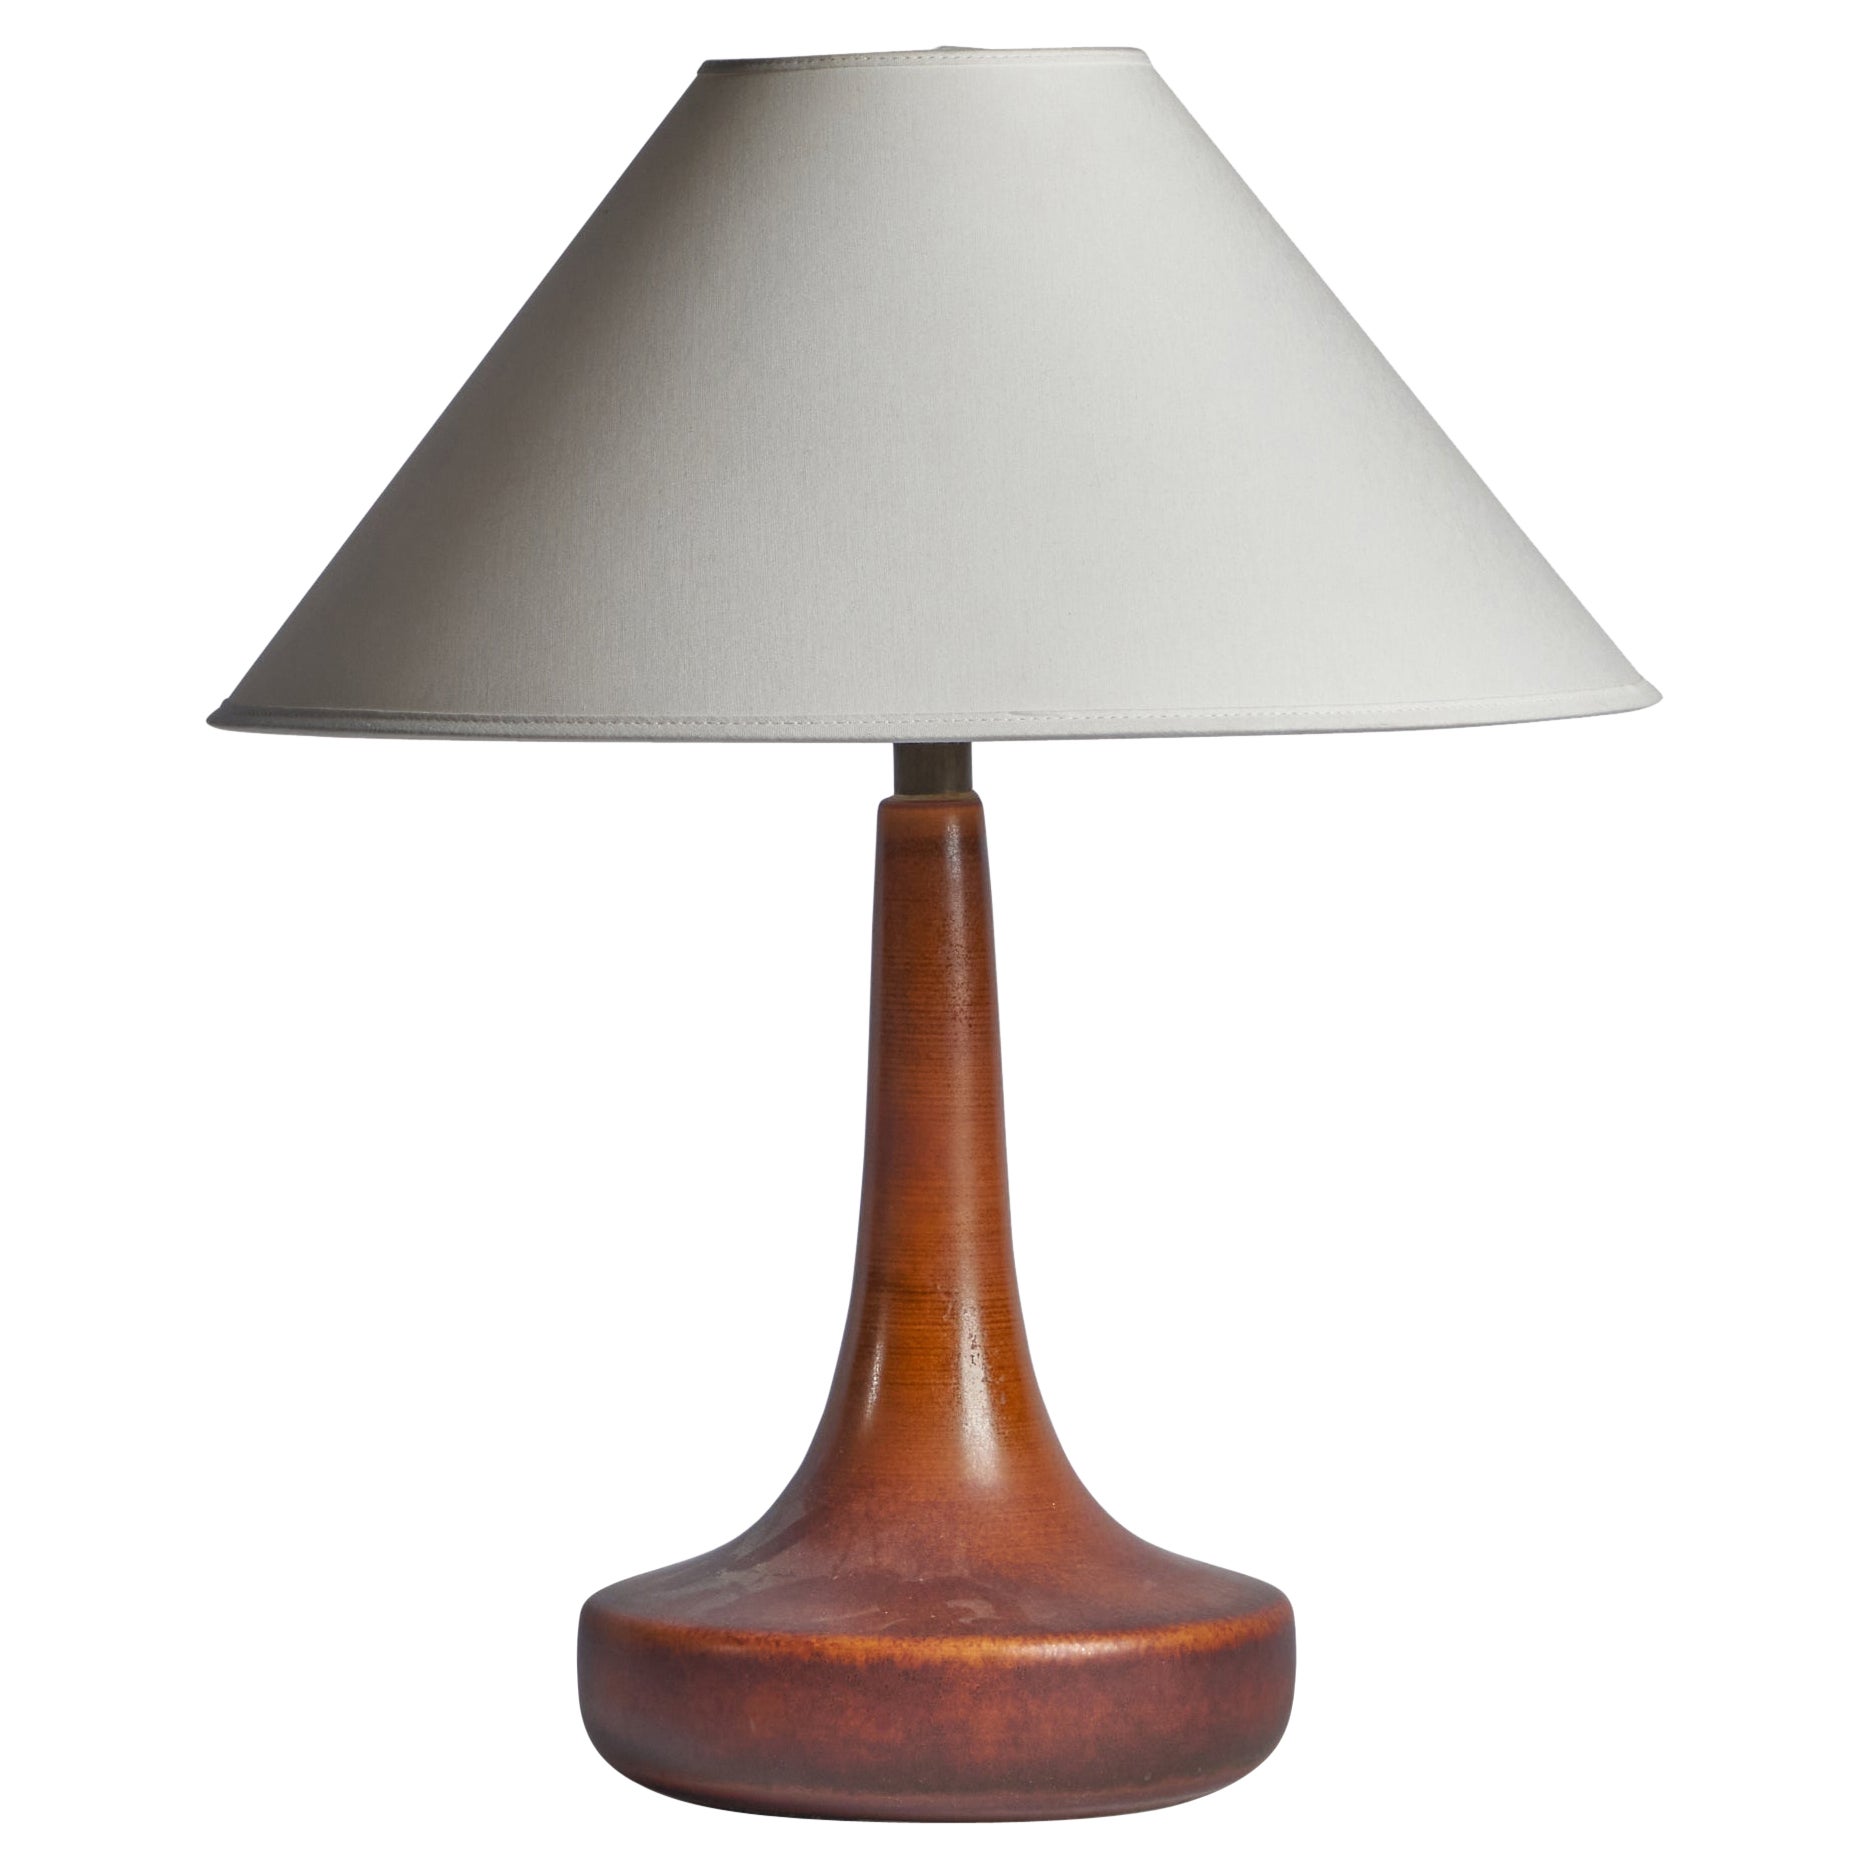 Lotte and Gunnar Bostlund, Table Lamp, Ceramic, Brass, Canada, 1960s For Sale